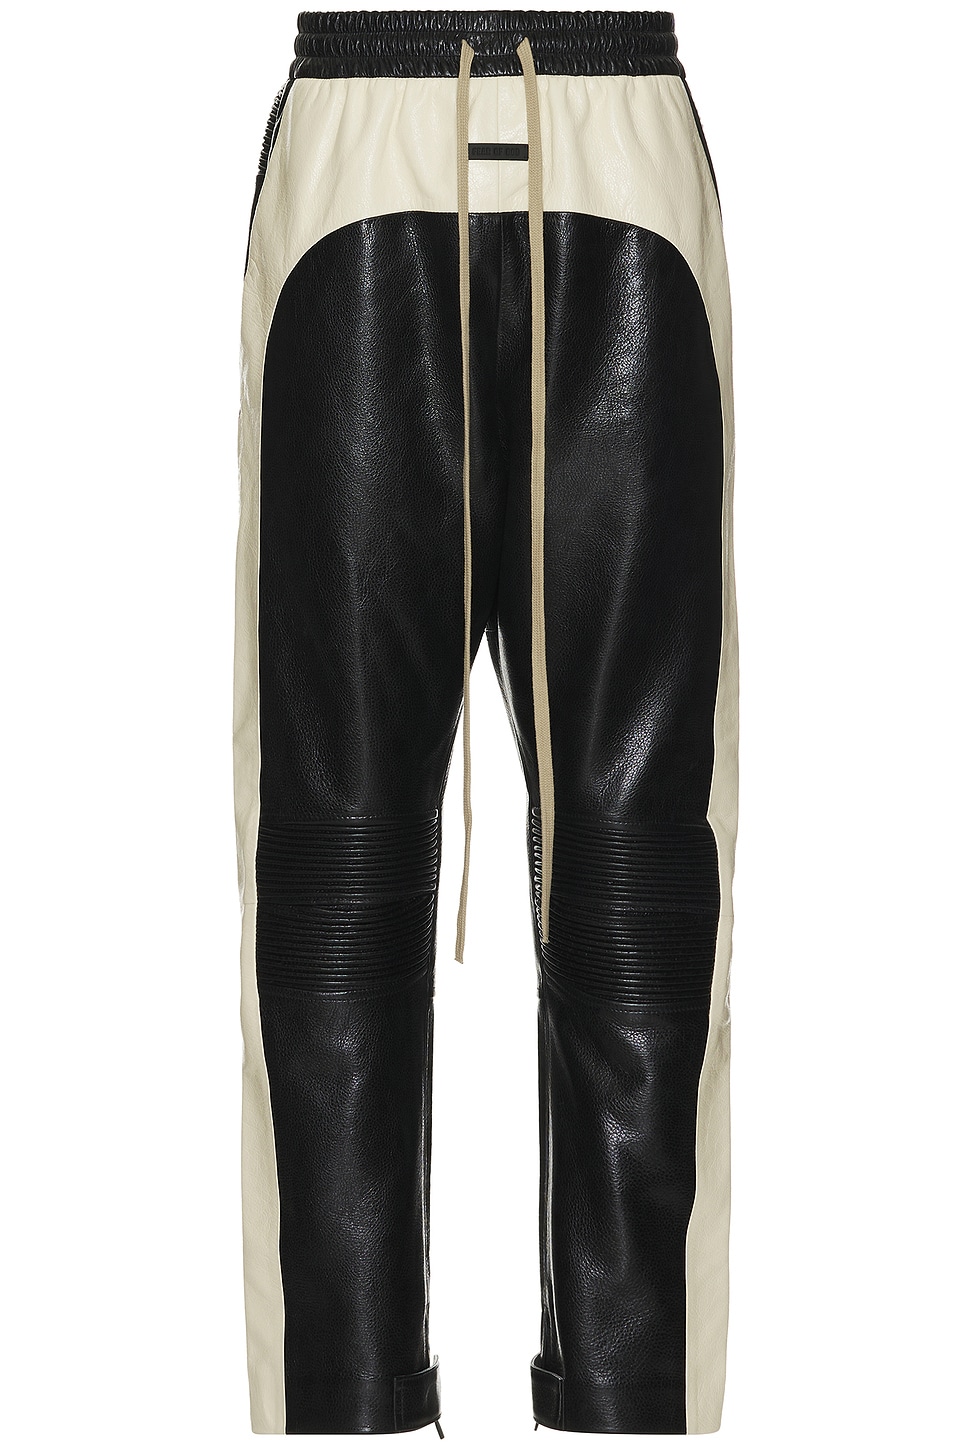 Image 1 of Fear of God Moto Pant in Black/Cream